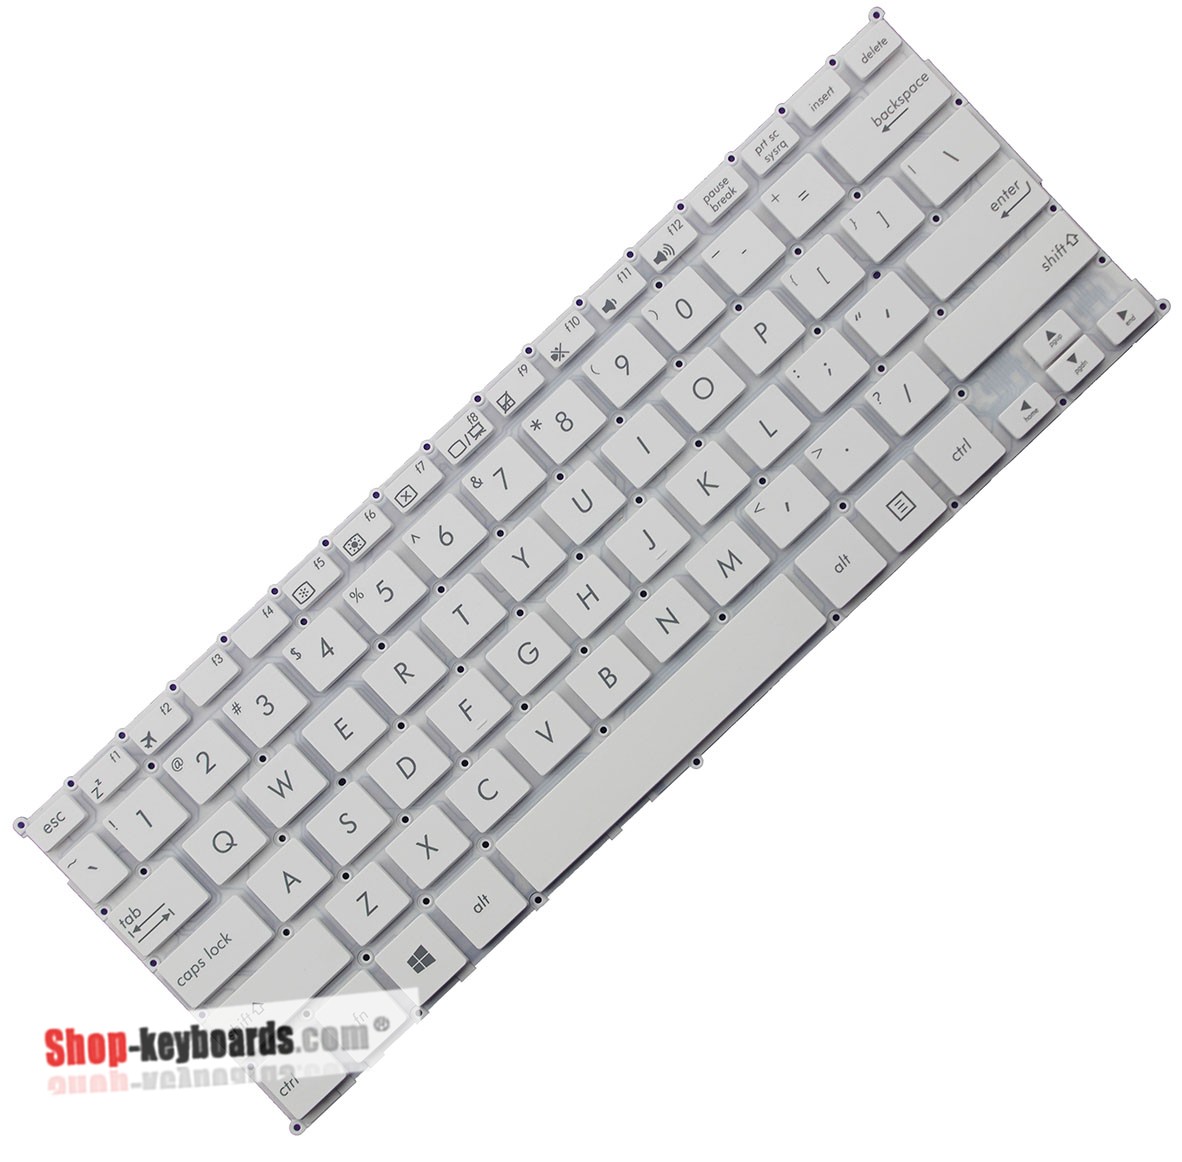 Asus 0KNL0-1120LA00 Keyboard replacement